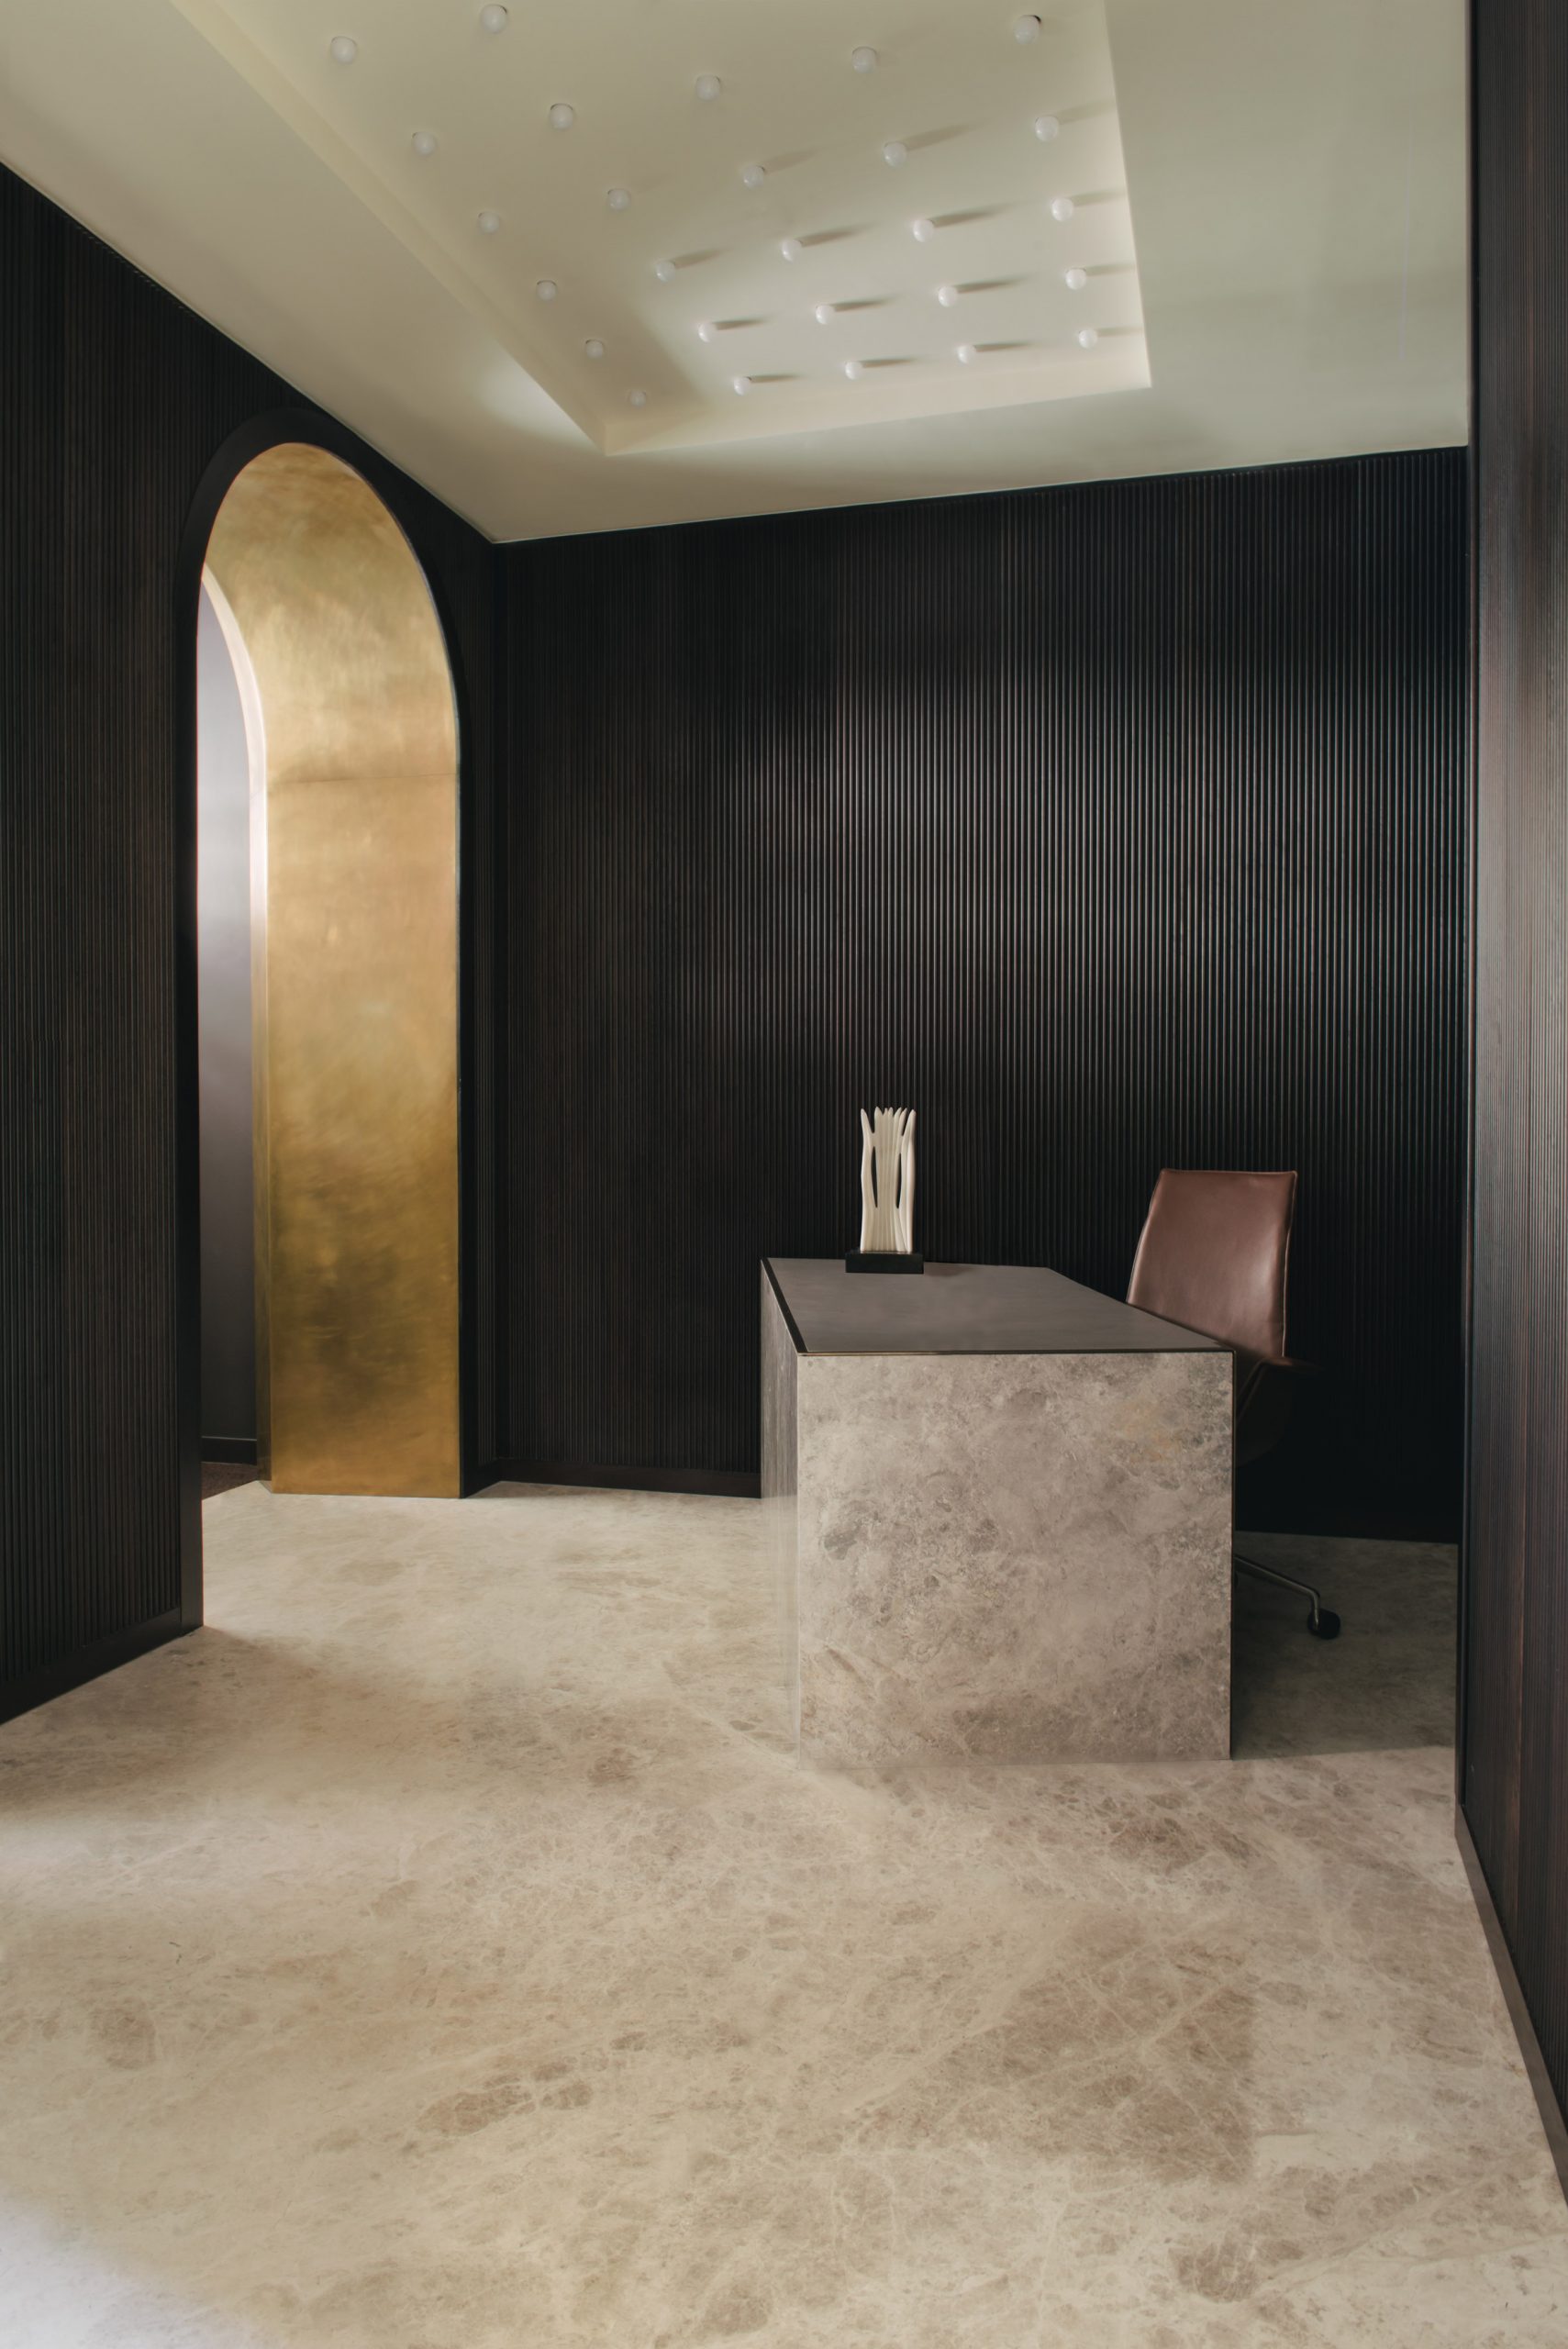 Lobby of Mandeville Place office with textured black walls, marble flooring and gold entryway